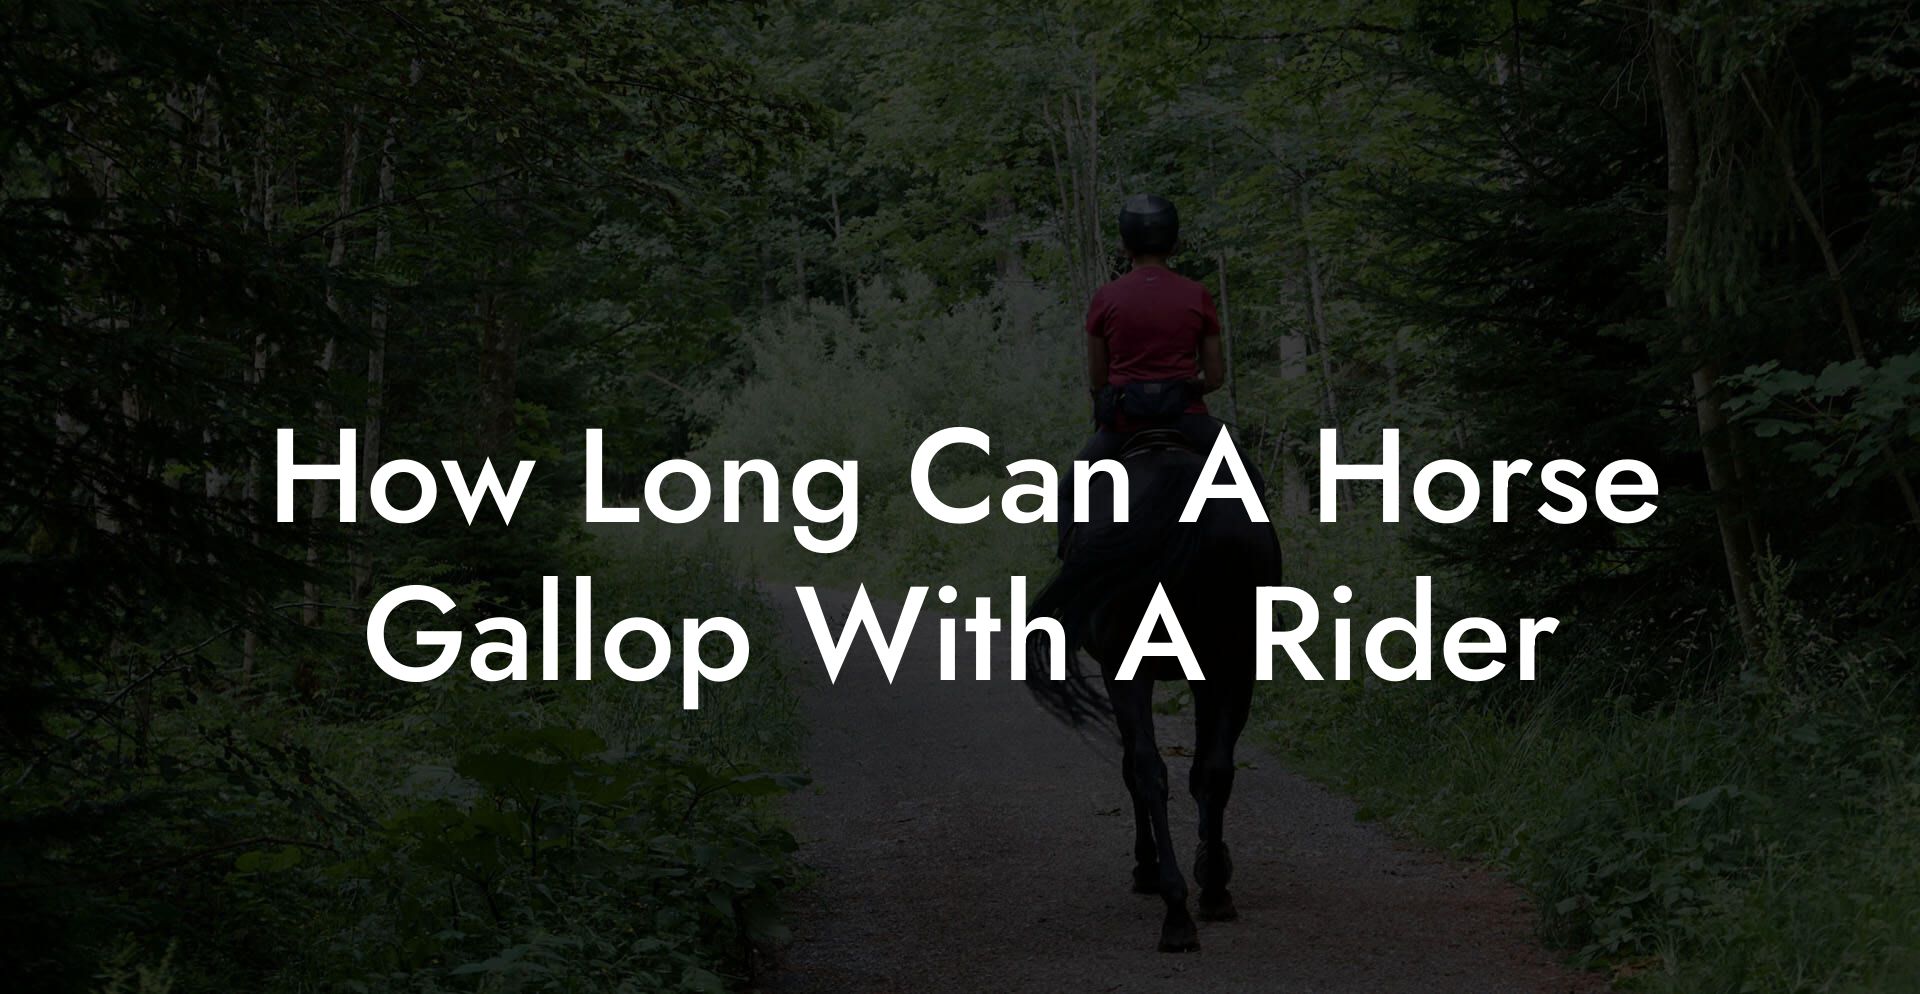 How Long Can A Horse Gallop With A Rider